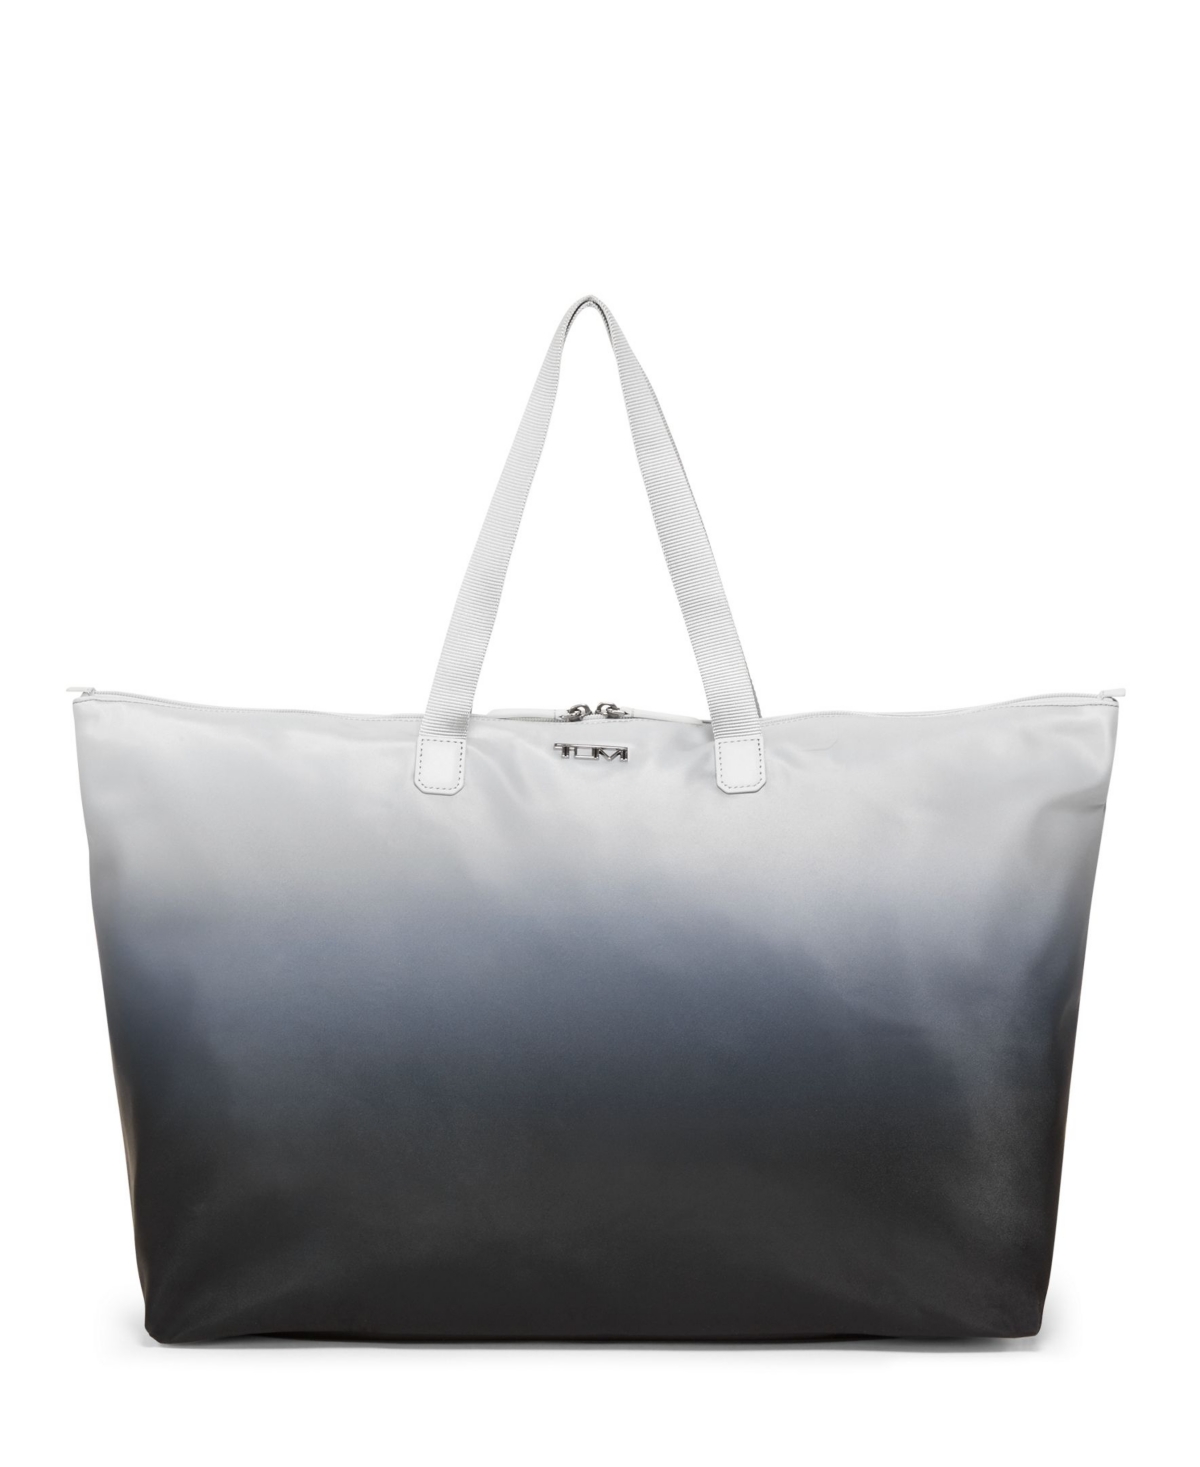 Tumi Voyageur Just In Case Large Zip Tote Bag In Gray Ombre